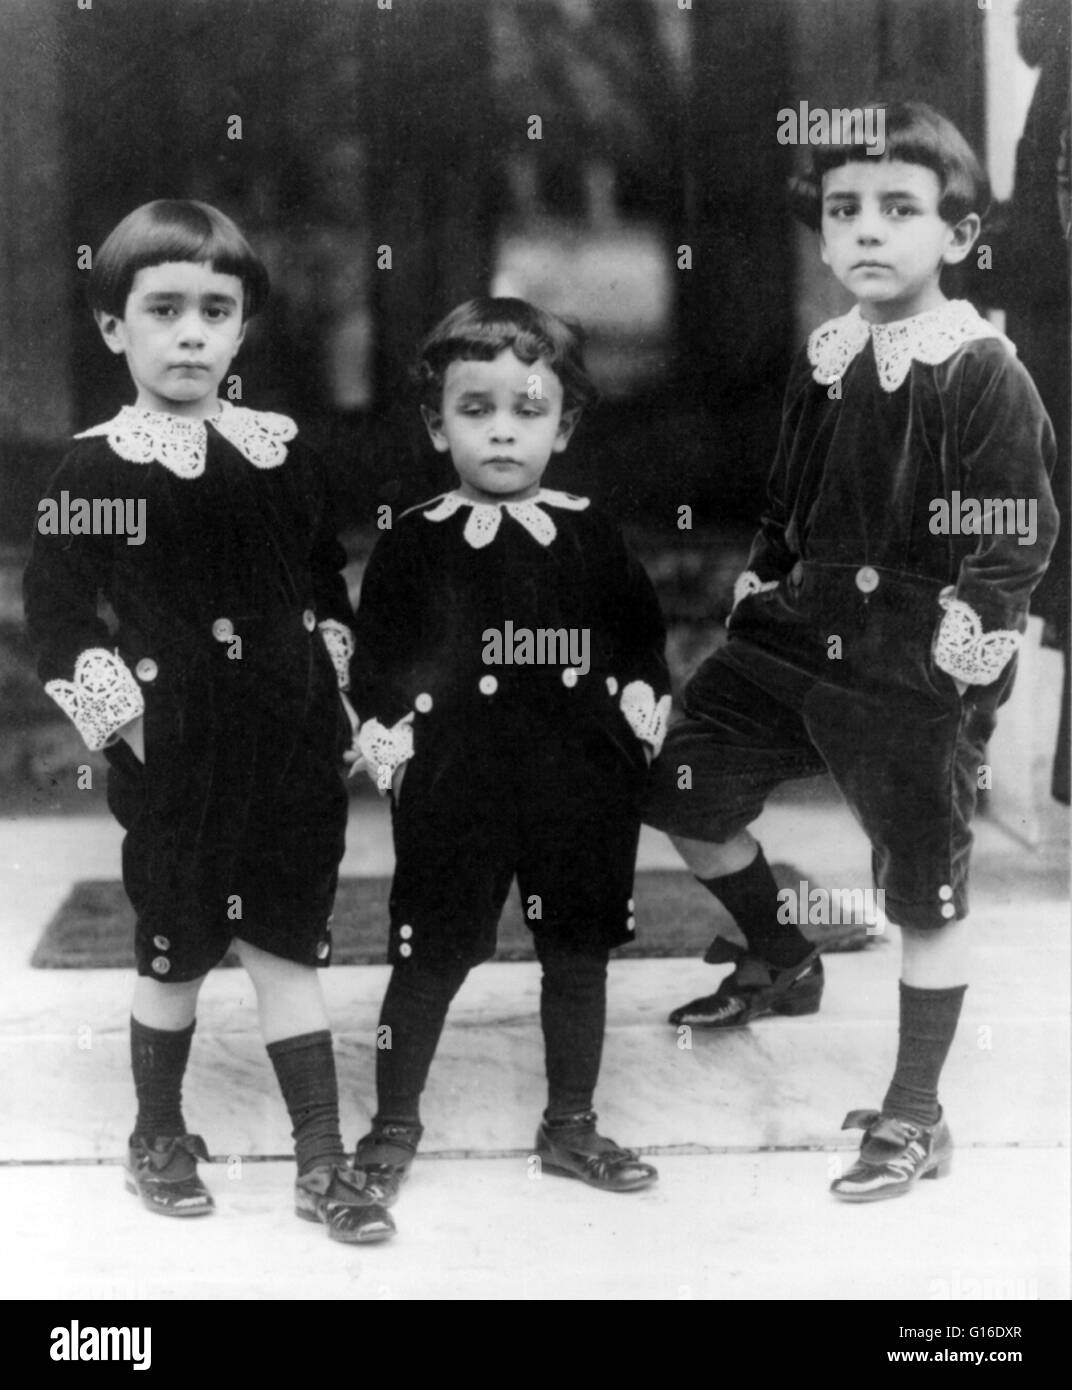 Entitled: 'Children wearing velvet suits inspired by Little Lord Fauntleroy style'. The classic Fauntleroy suit was a velvet cut-away jacket and matching knee pants worn with a fancy blouse with a large lace or ruffled collar. The Fauntleroy suit, so well Stock Photo